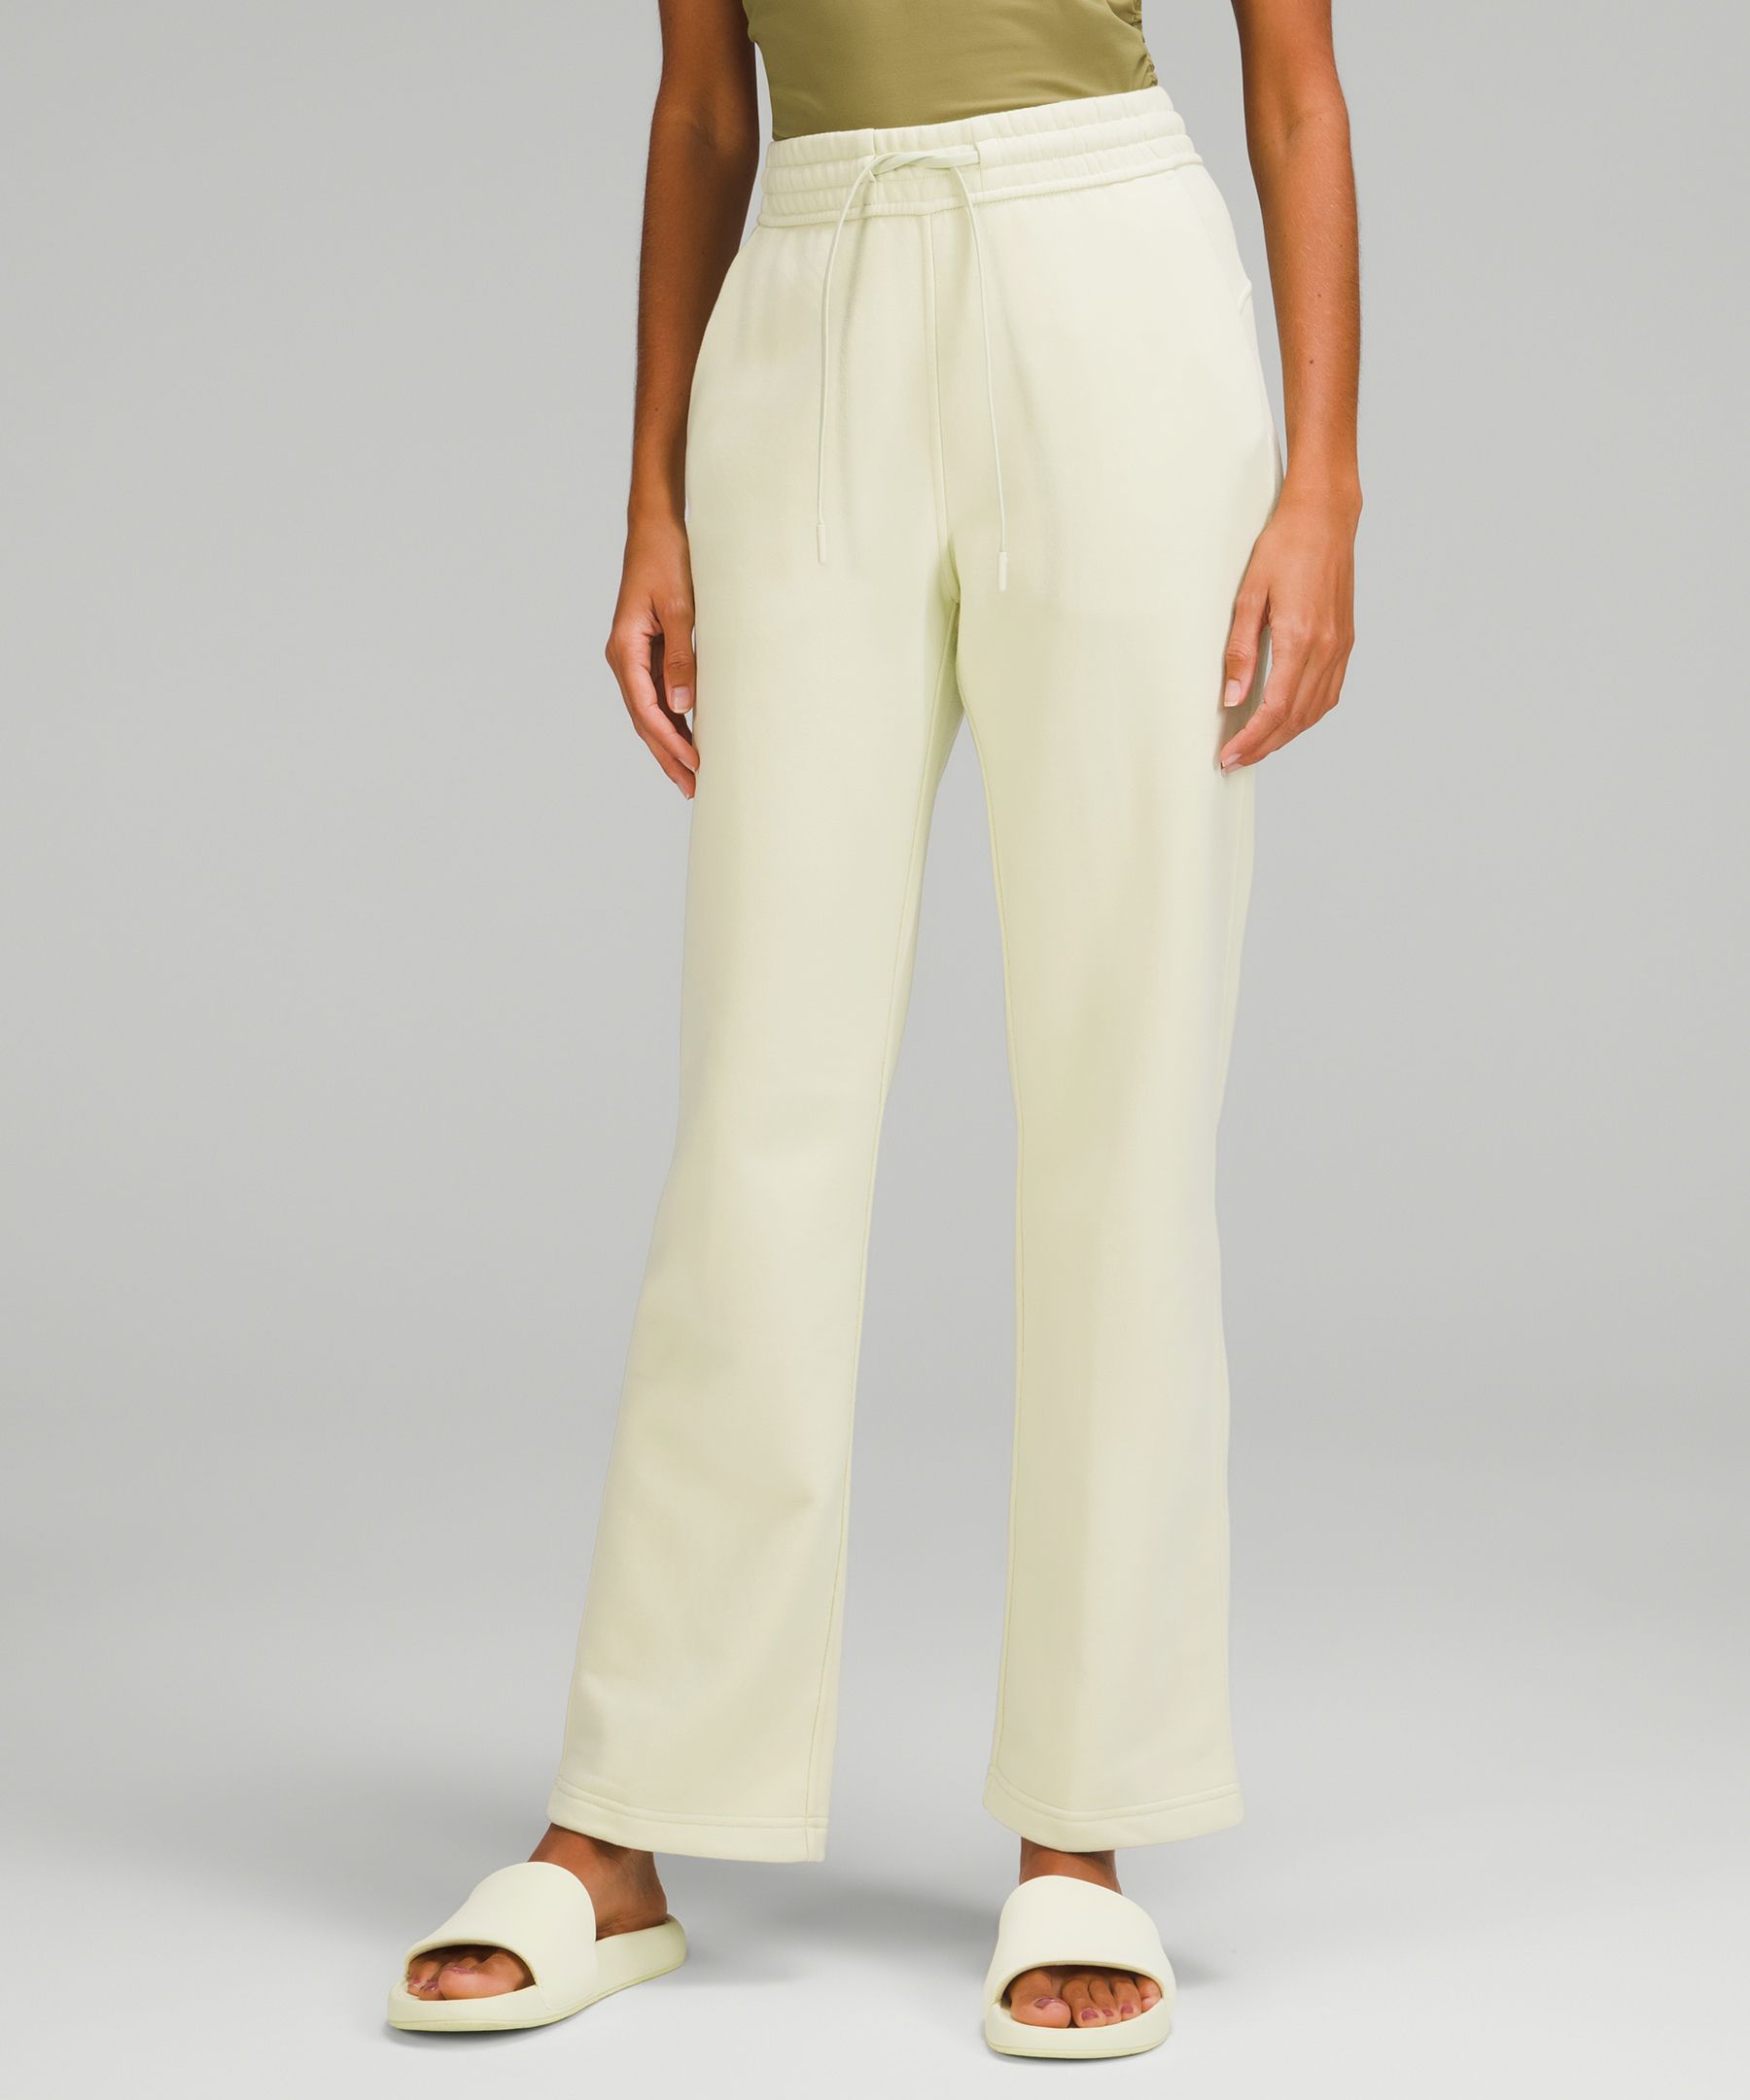 Loungeful Straight Leg Pant opinions? Does anyone have these to provide  some feedback? : r/lululemon